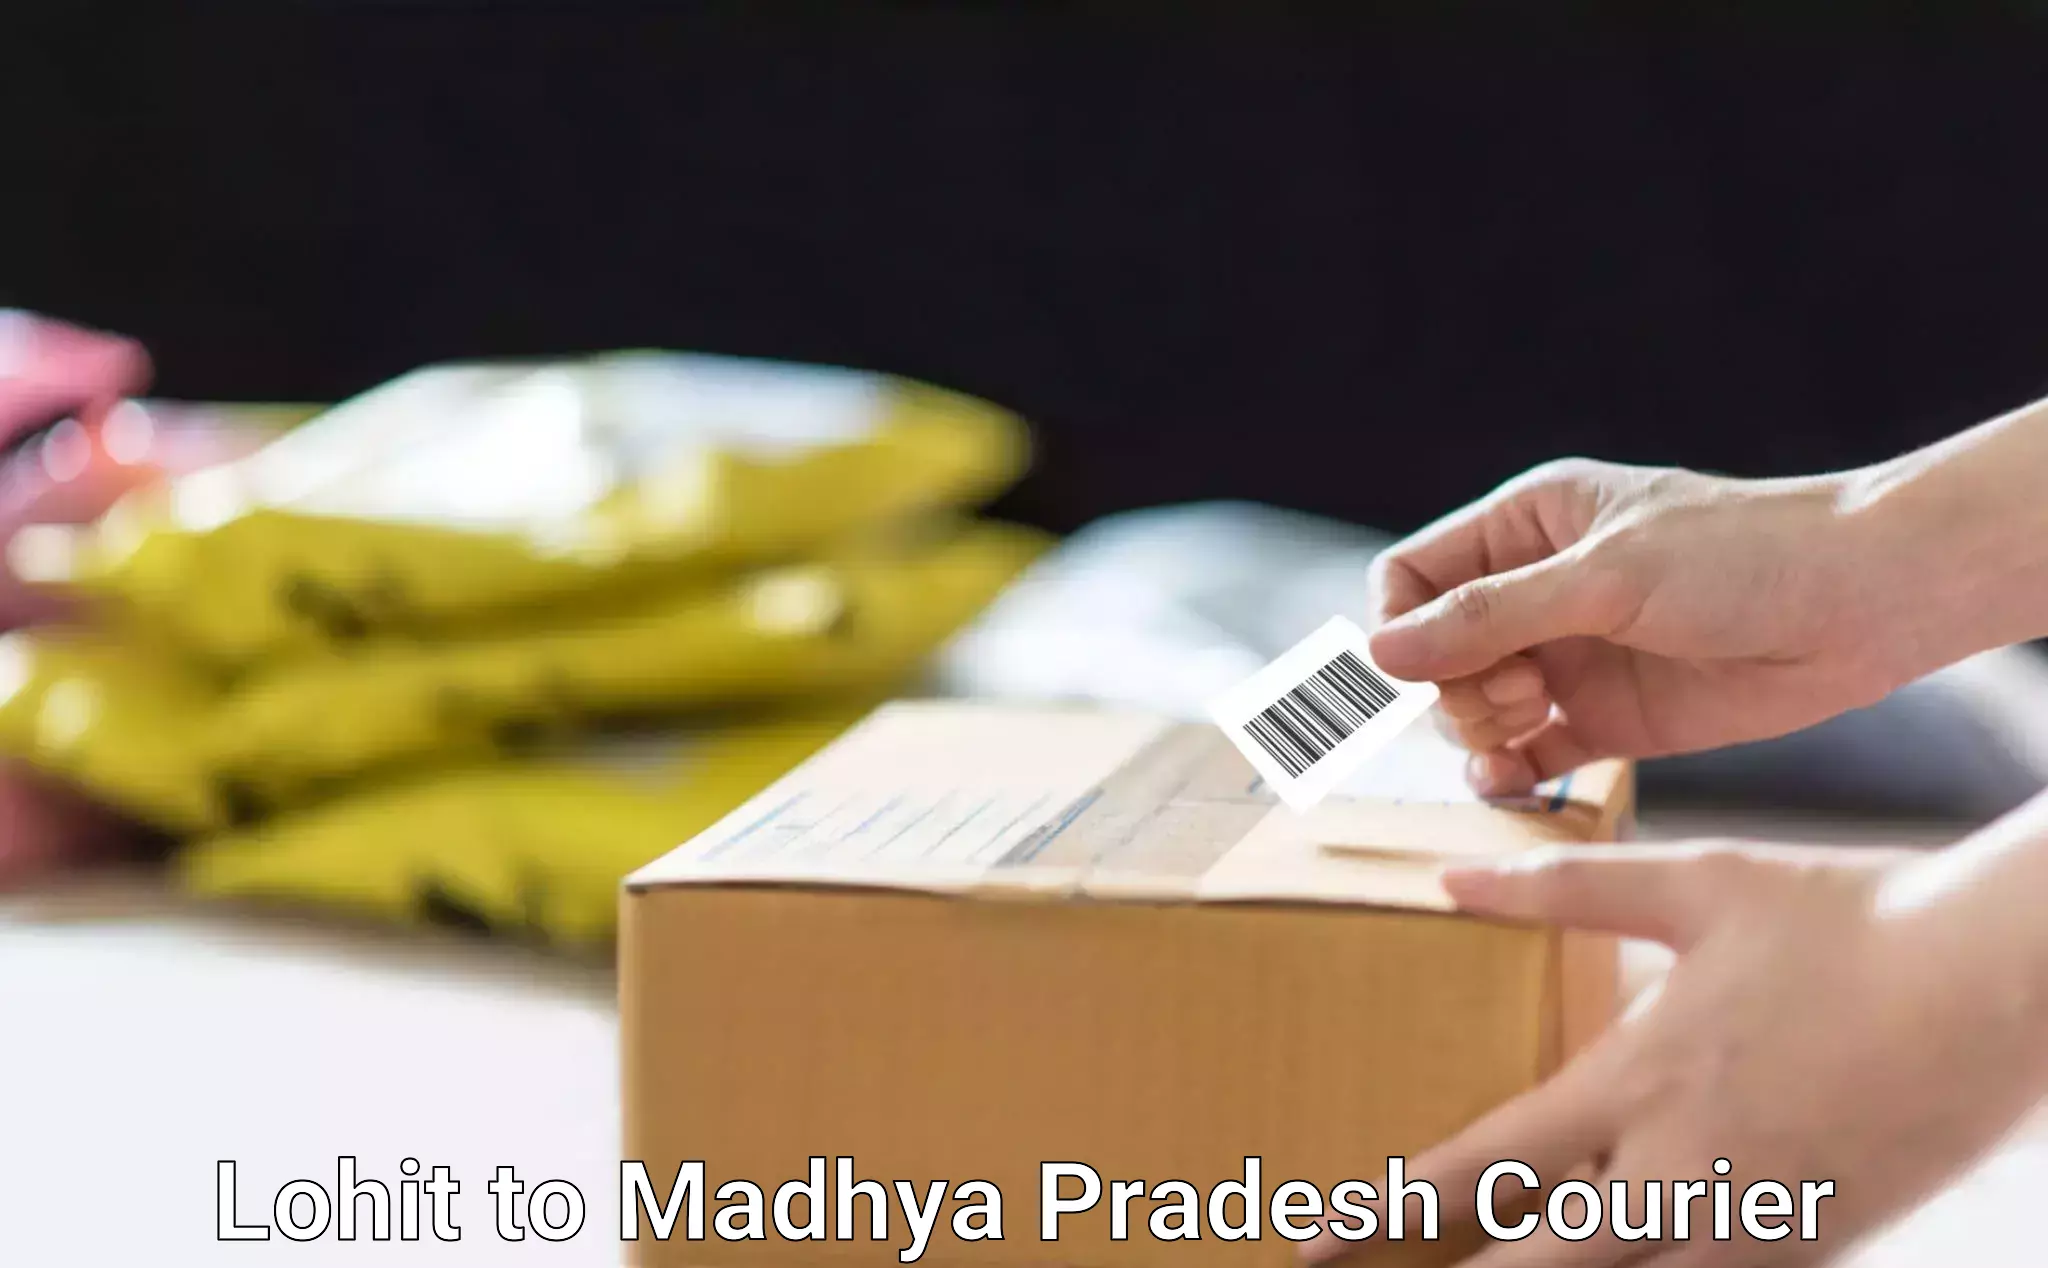 State-of-the-art courier technology Lohit to Madhya Pradesh